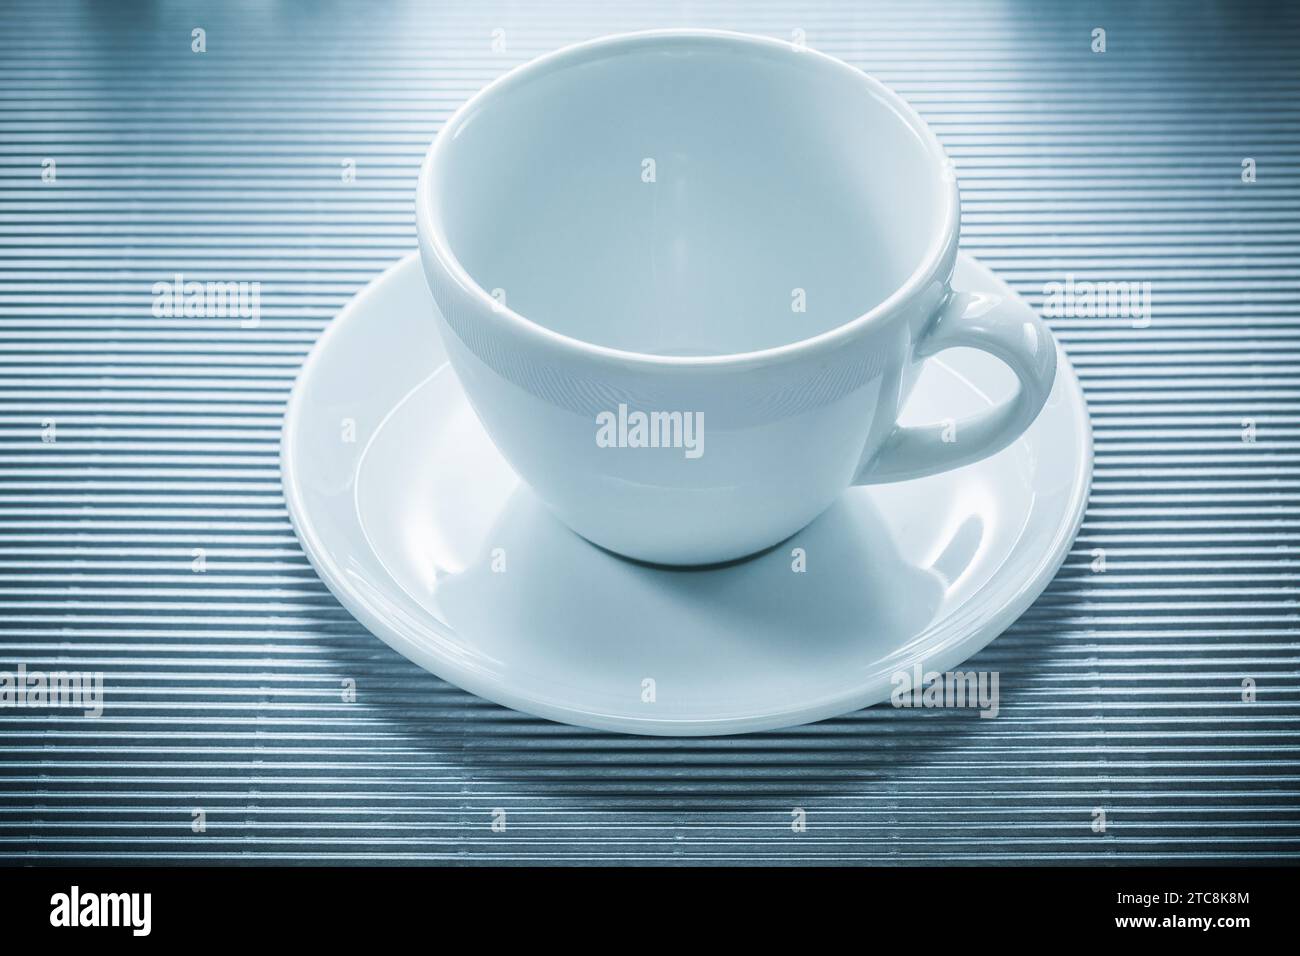 Coffee cup saucer on striped background Stock Photo